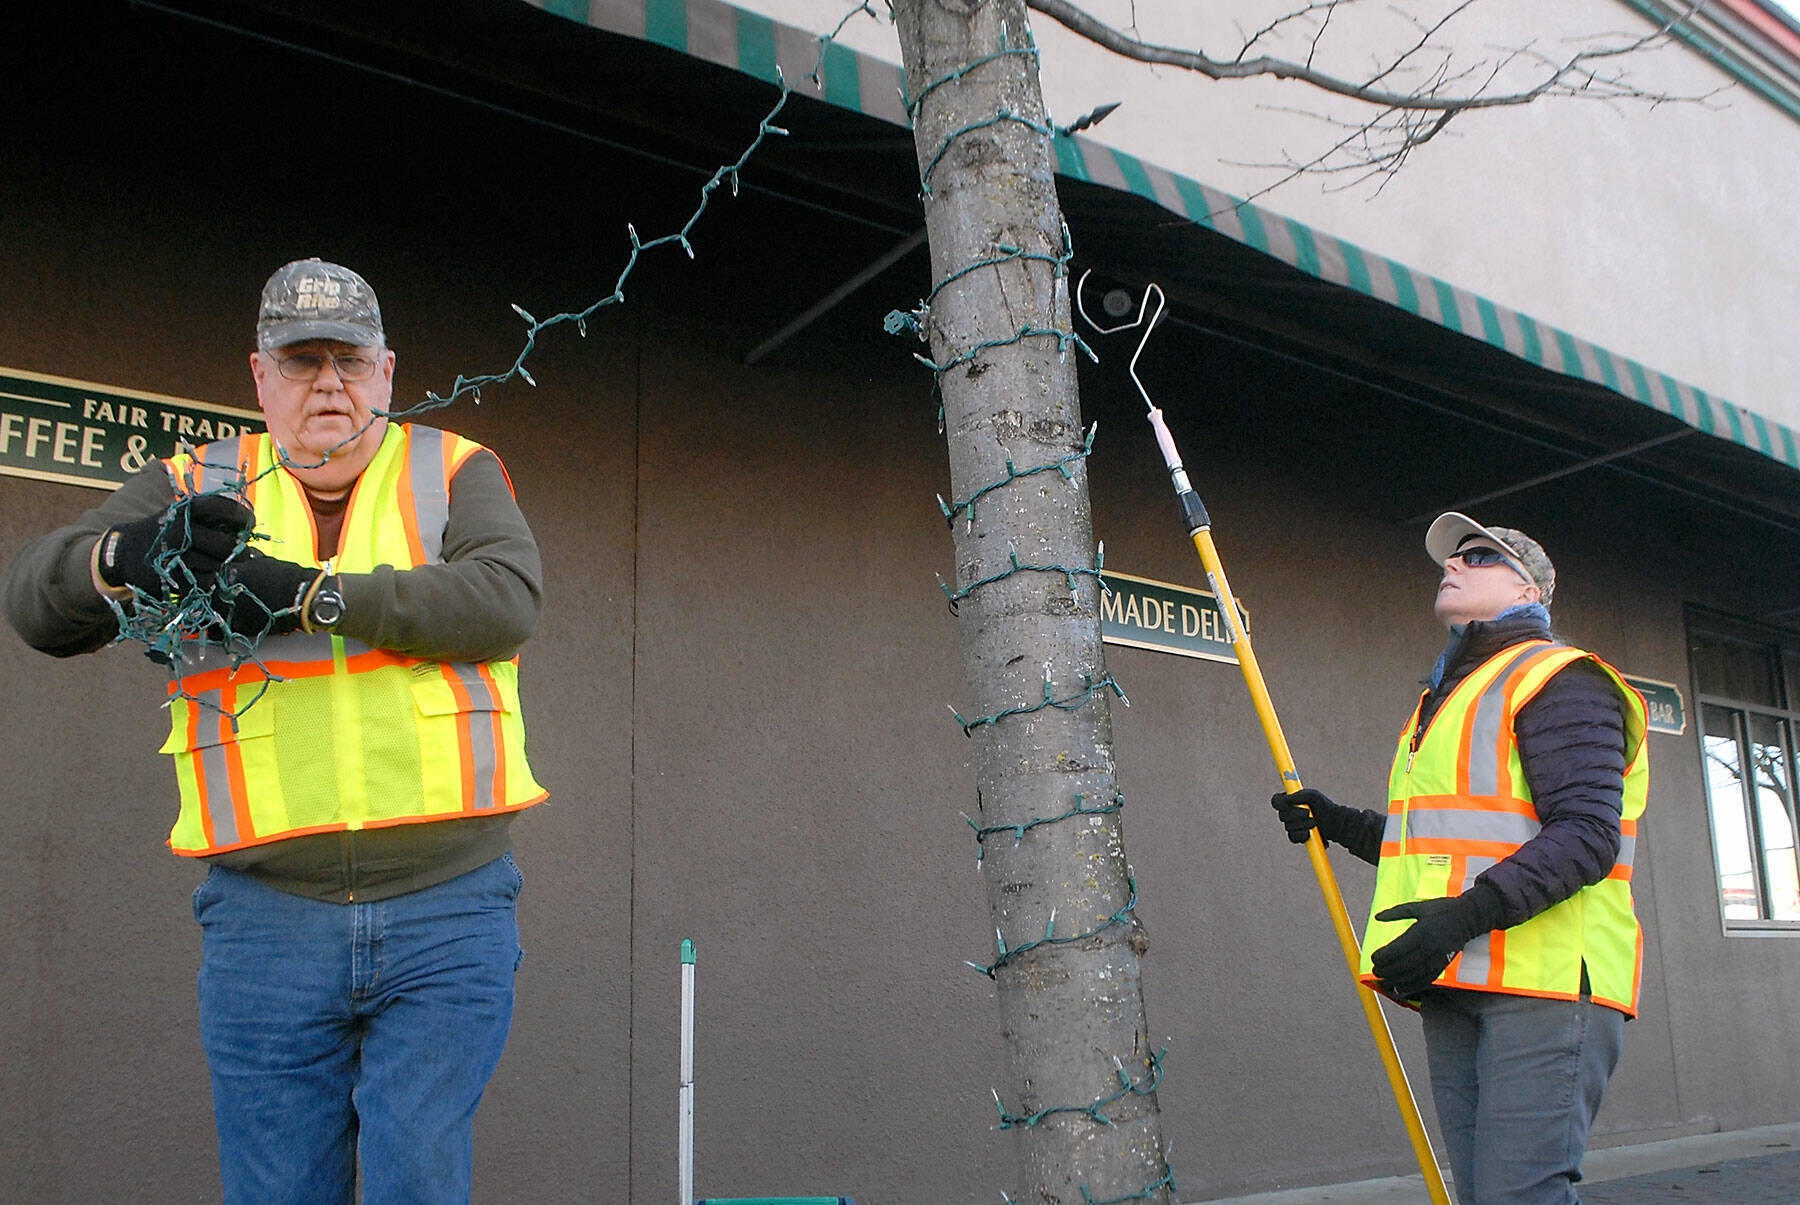 David and Carla Sue, members of the Olympic Kiwanis Club, string Christmas lights on a curbside tree in the 200 block of West First Street in downtown Port Angeles on Saturday. The service club was given the task of adorning trees in the downtown area with strings of lights supplied by the Port Angeles Downtown Association. (Keith Thorpe/Peninsula Daily News)